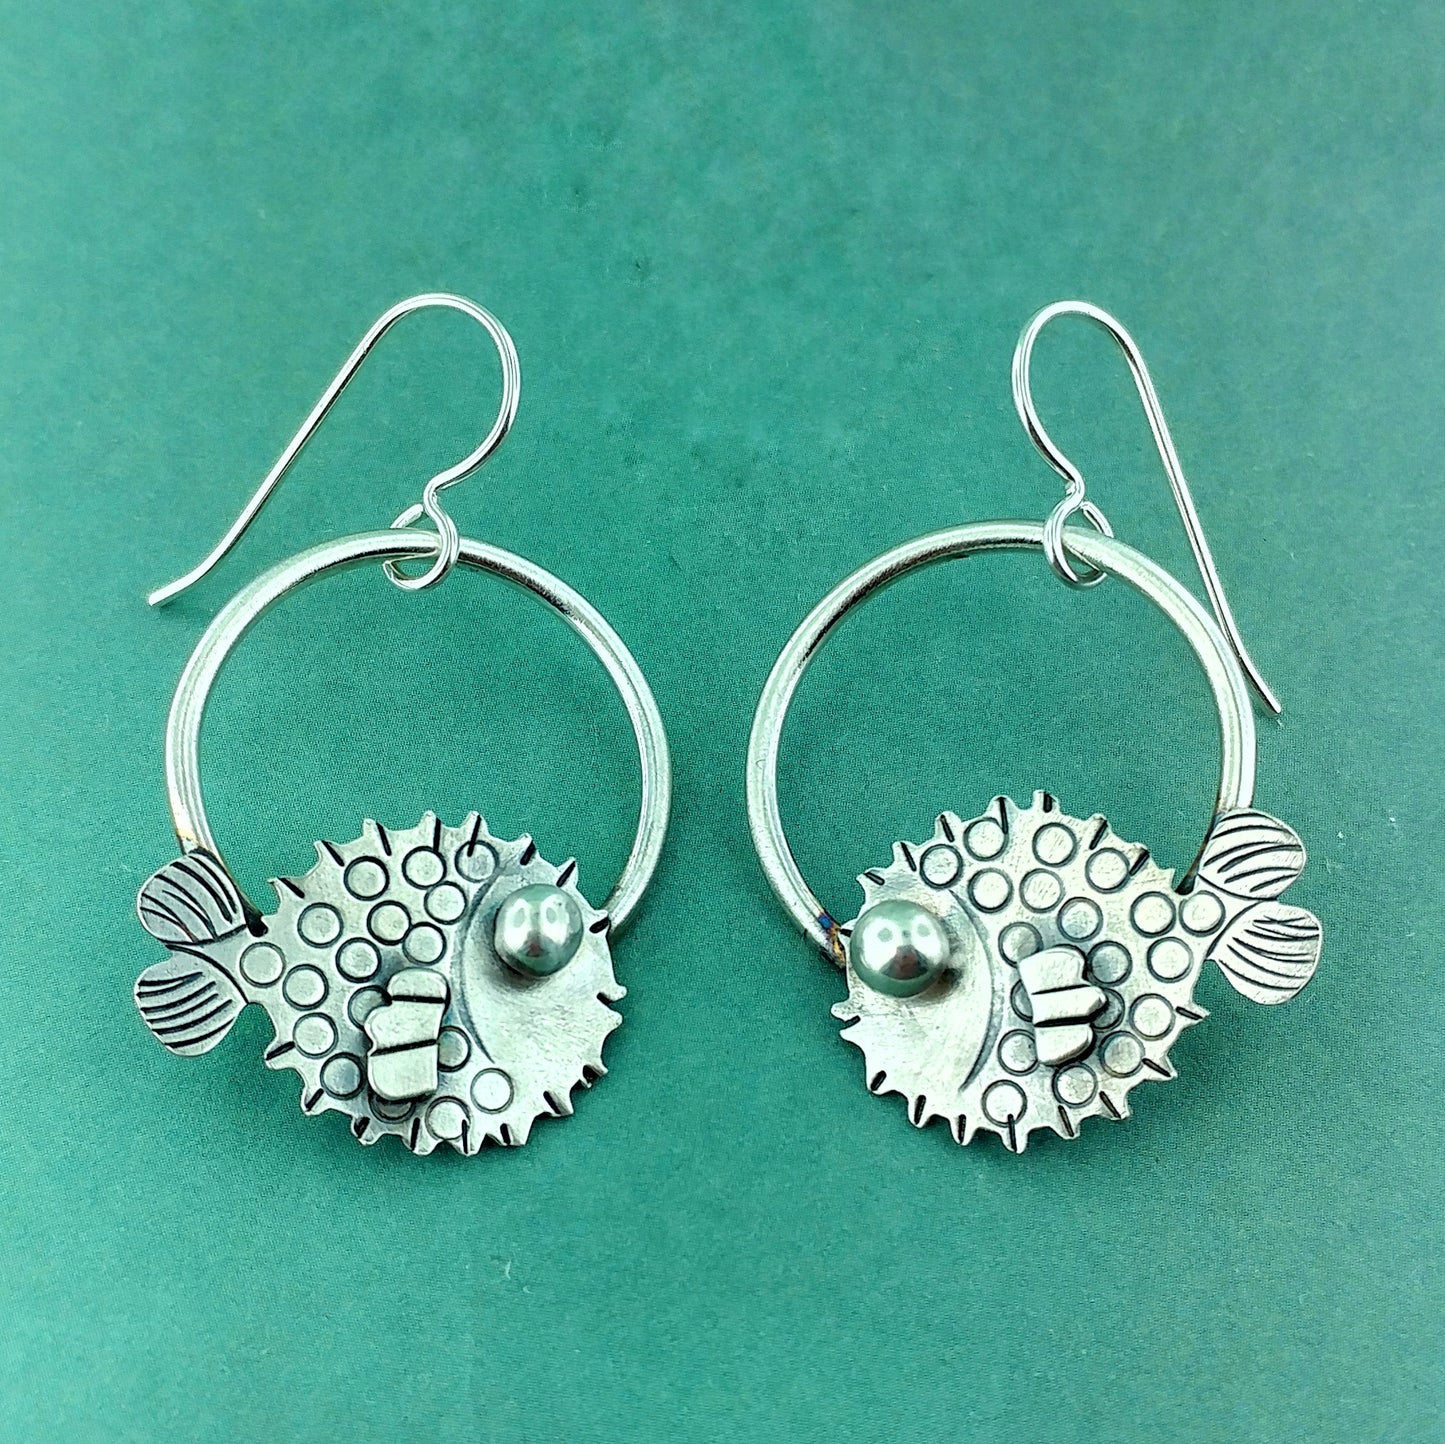 Puffer fish earrings made in sterling silver